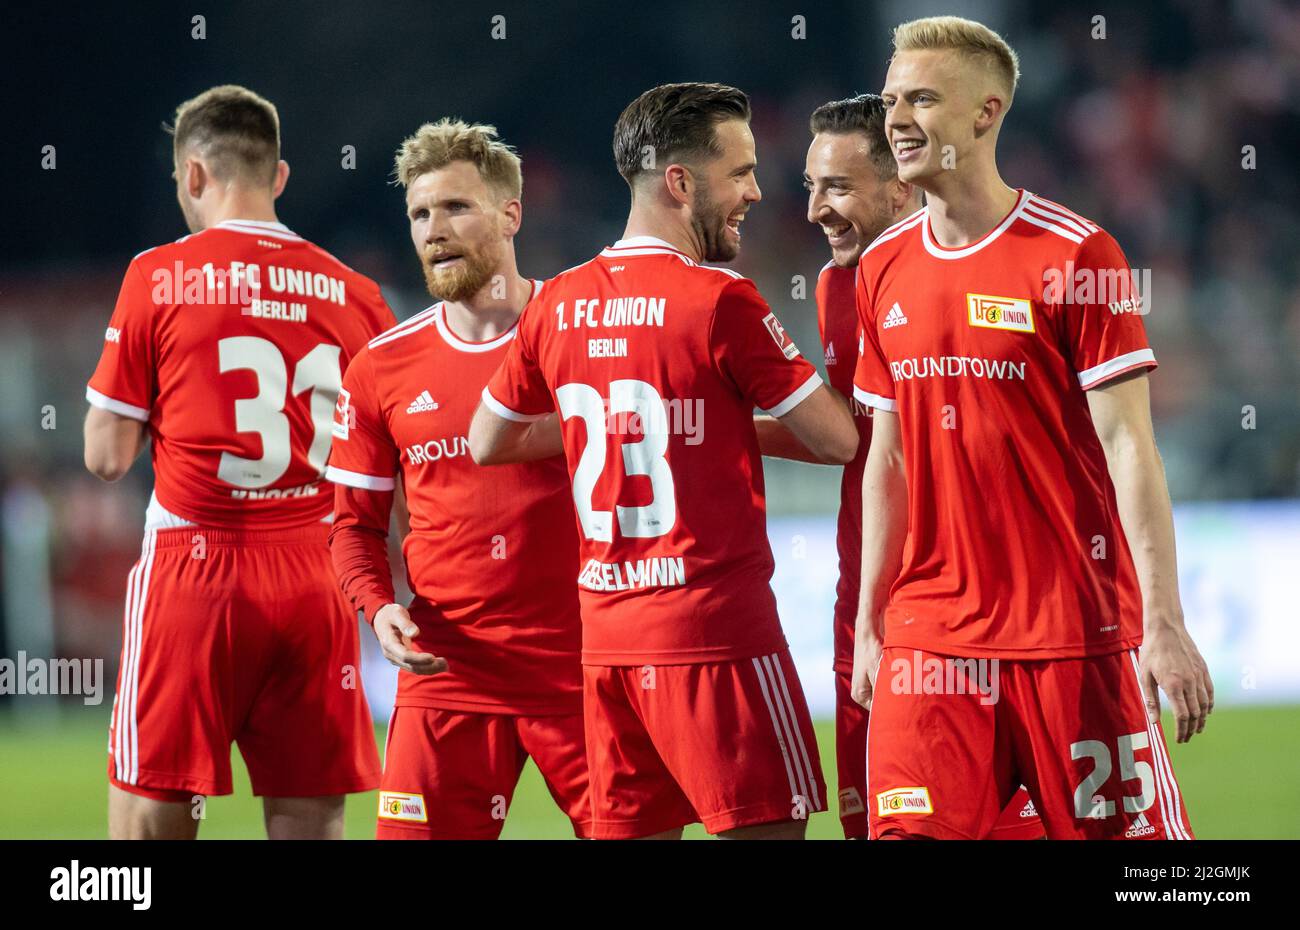 Berlin, Germany. 01st Apr, 2022. Soccer: Bundesliga, 1. FC Union Berlin - 1. FC Köln, Matchday 28, An der Alten Försterei. Berlin's Robin Knoche (l-r), Andreas Voglsammer, Niko Gießelmann, Kevin Möhwald and Timo Baumgartl high-five each other after the victory. Credit: Andreas Gora/dpa - IMPORTANT NOTE: In accordance with the requirements of the DFL Deutsche Fußball Liga and the DFB Deutscher Fußball-Bund, it is prohibited to use or have used photographs taken in the stadium and/or of the match in the form of sequence pictures and/or video-like photo series./dpa/Alamy Live News Stock Photo